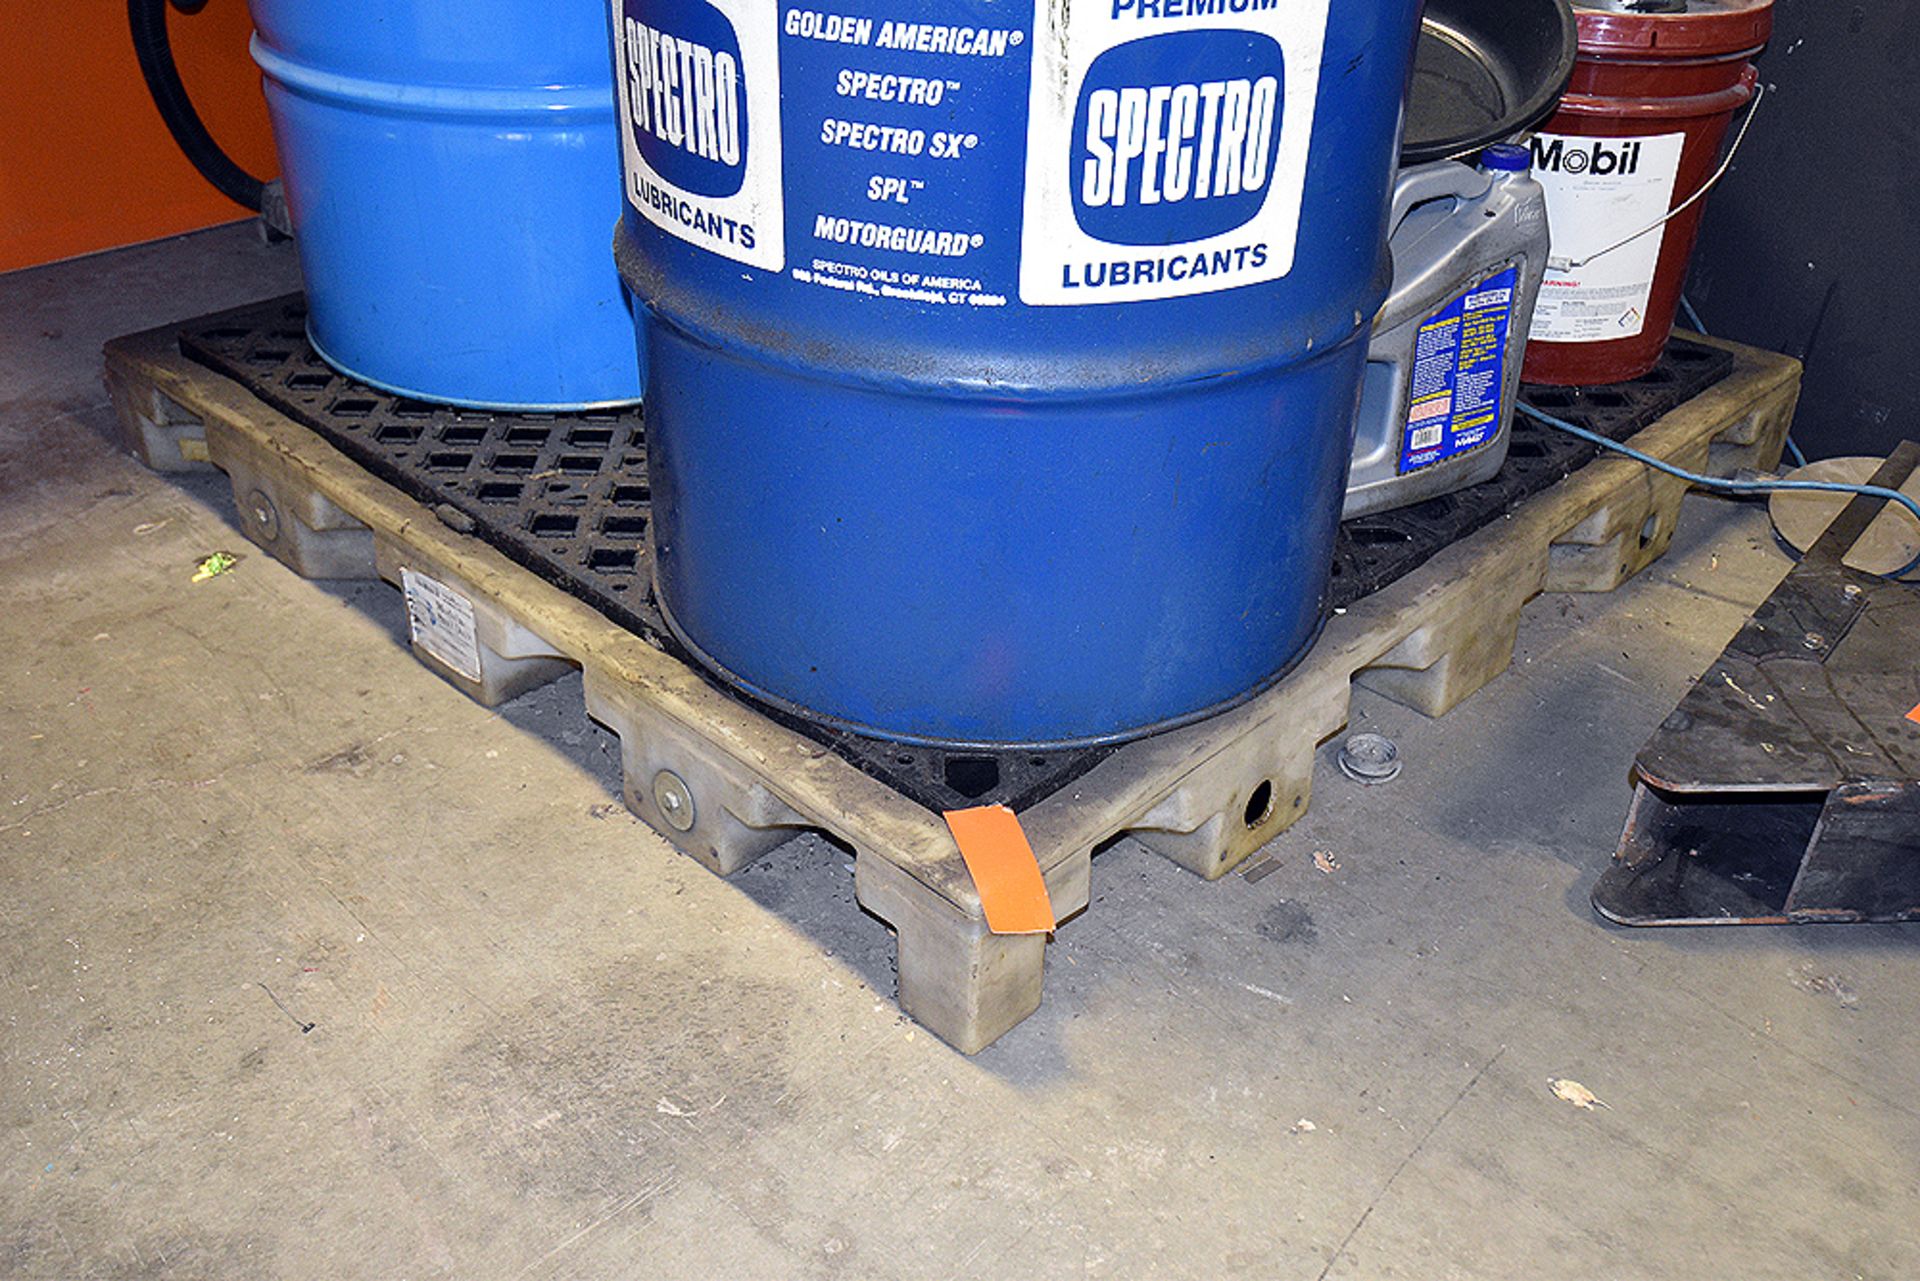 Spectro Premium Lubricant Oil, (2) Partial Drum w/unknown Contents, w/Pig Modular Spill Deck - Image 6 of 7